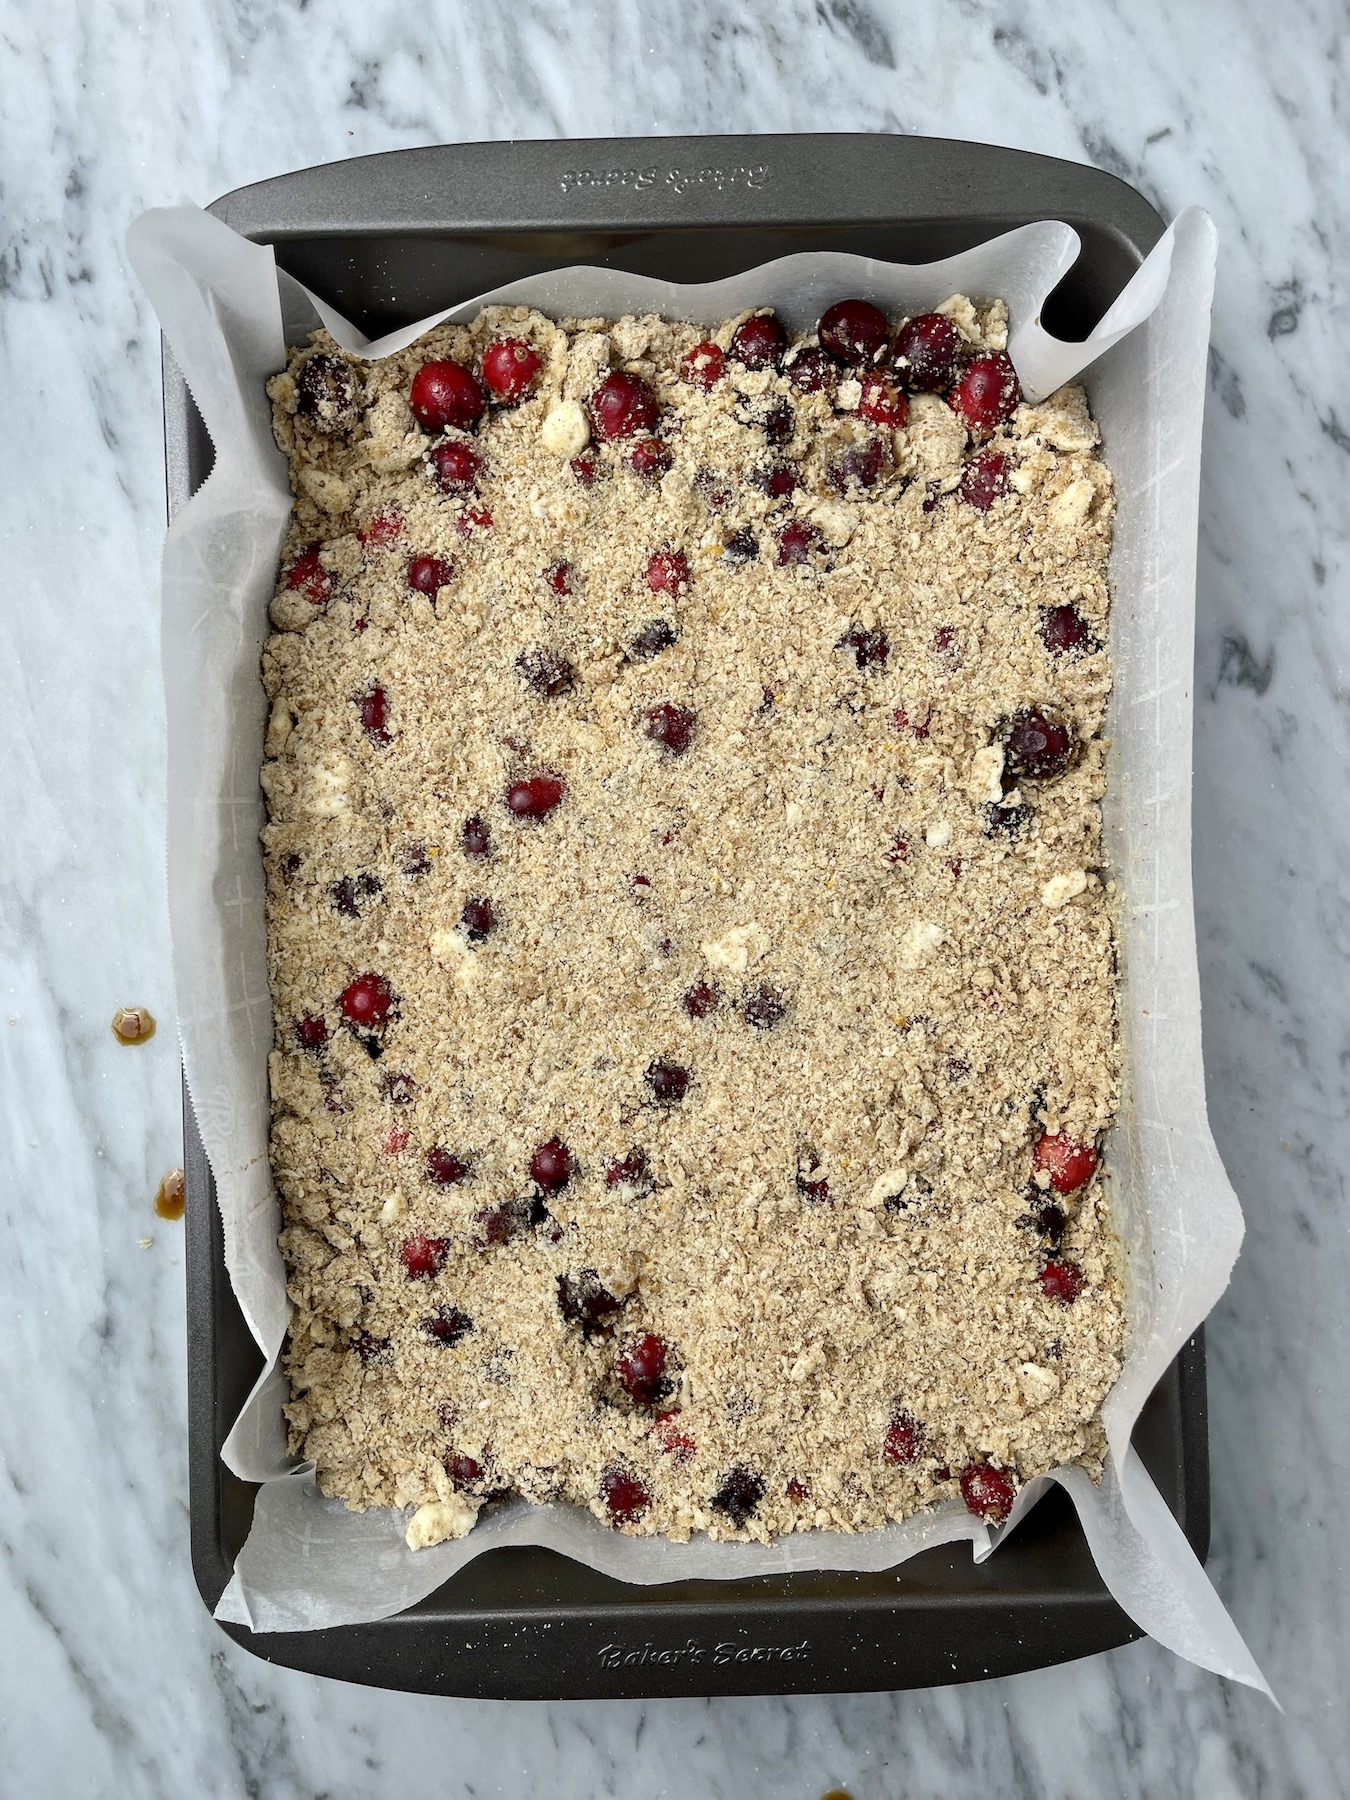 An unbaked cranberry crumble.